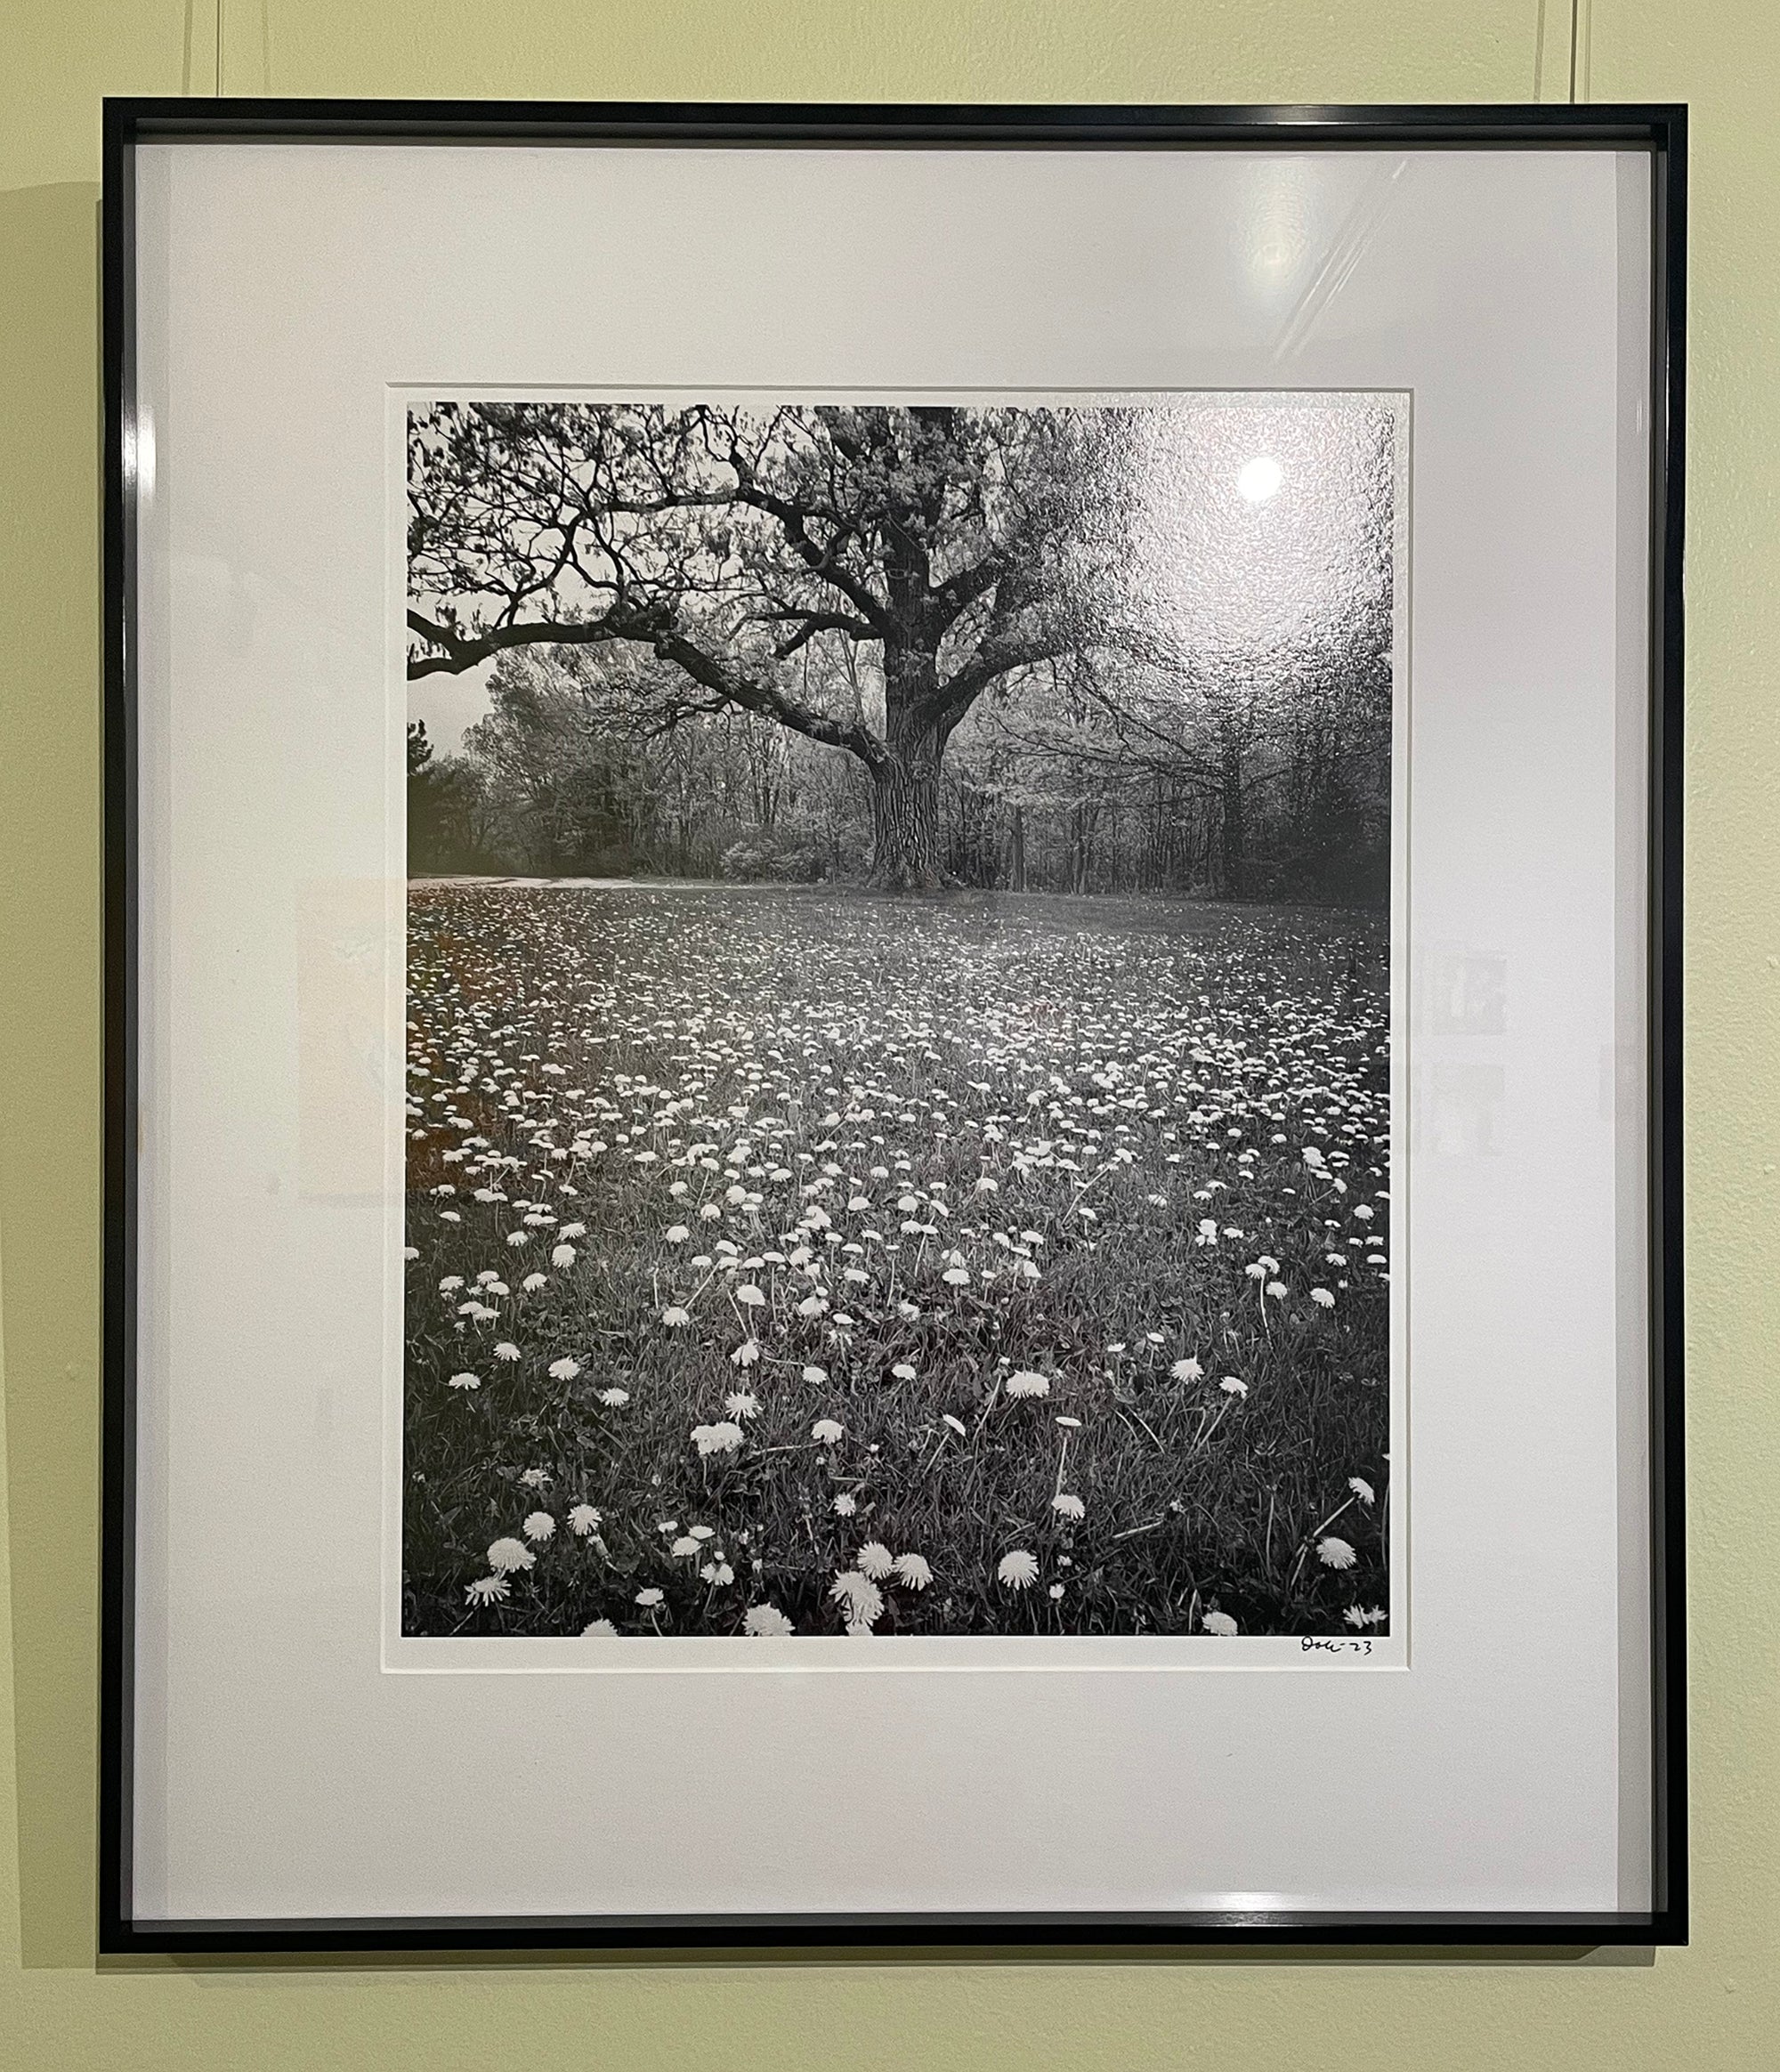 Bicentennial Bur Oak in a Field of Dandelions, 16 x 20-inch photograph by Keith Dotson, seen on exhibition at Longue Vue House and Gardens in New Orleans